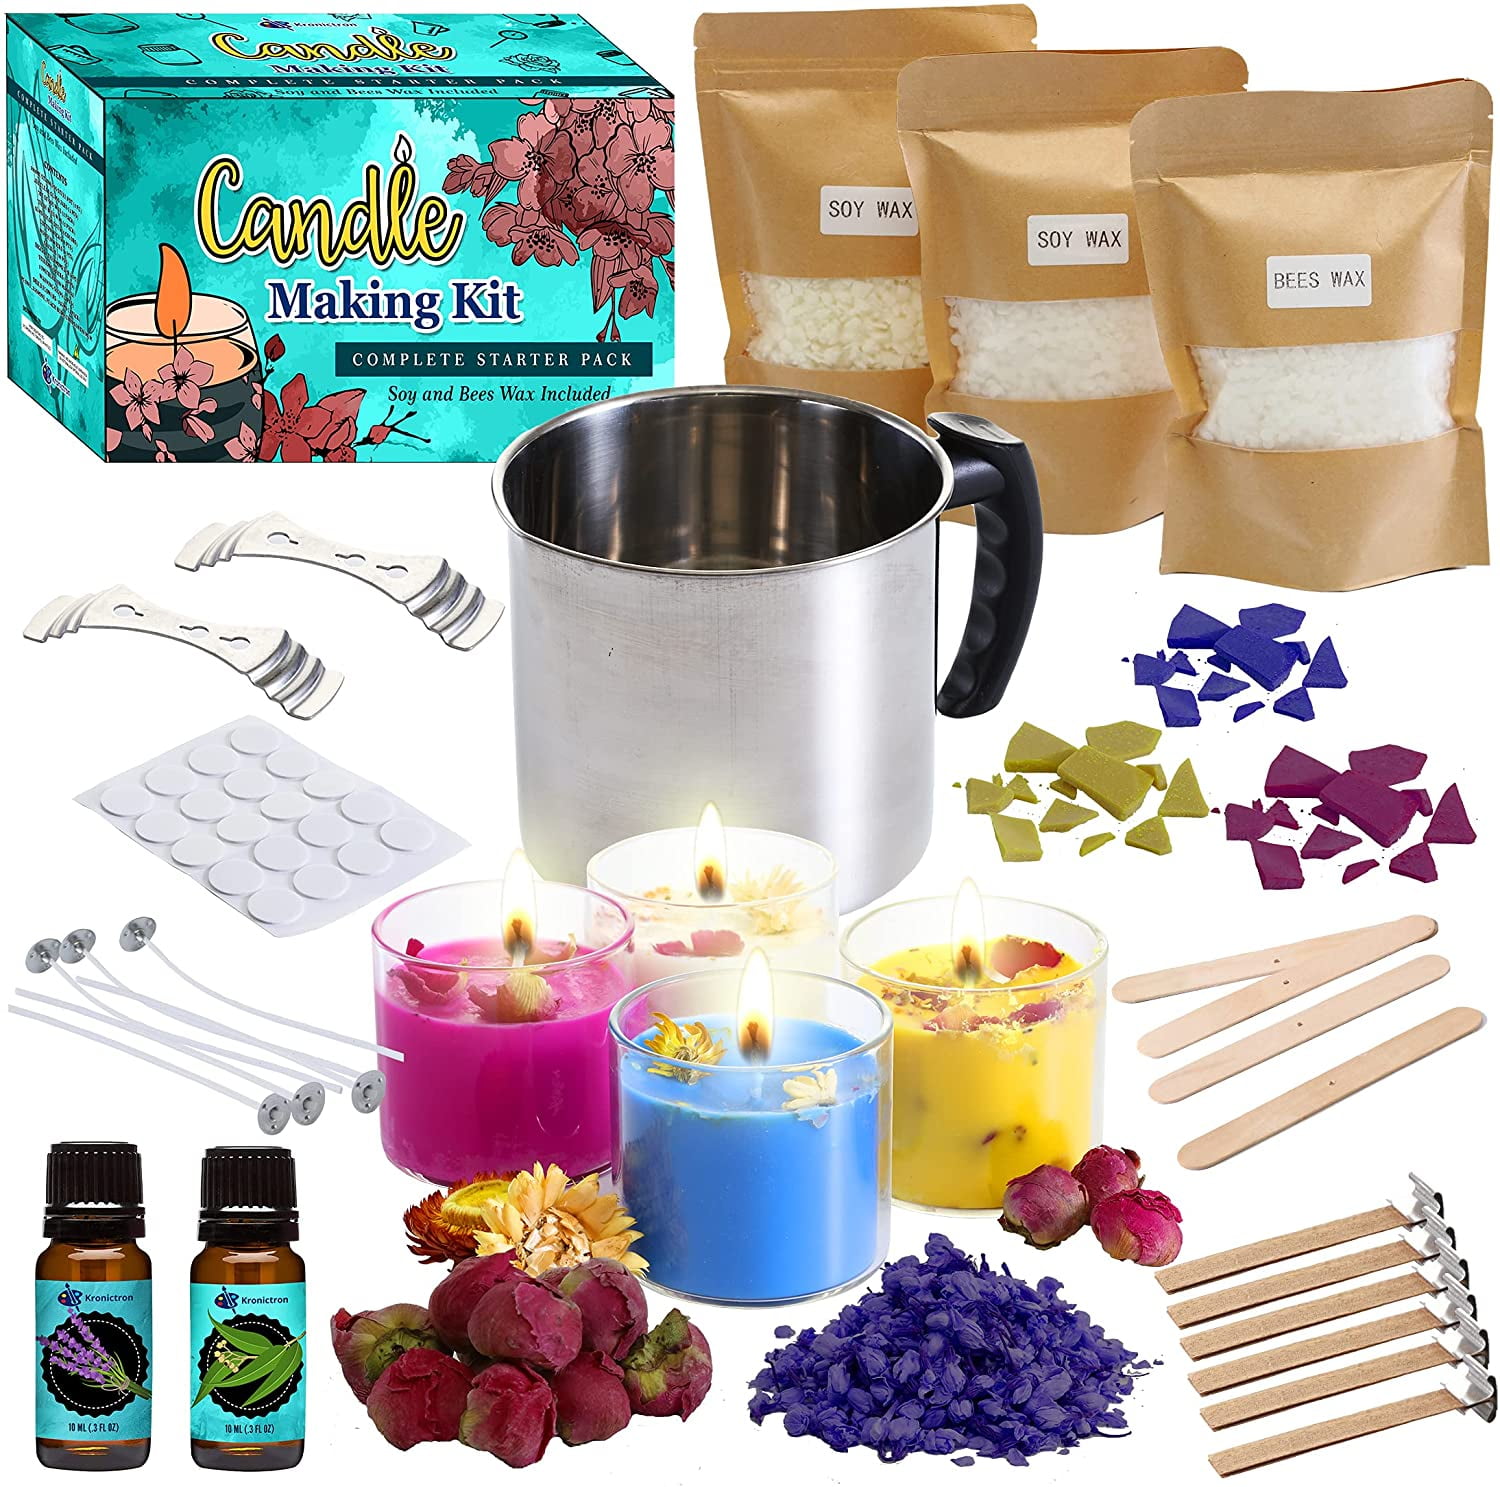 Scented Candle Making Kit,DIY Candle Craft Tools Candle Beginners DIY Tools with Candle Making Cup,Candles tins,Candle Wicks,Beeswax,Candle Wicks Holder Gift for Mothers Day,Christmas,Thanksgiving 